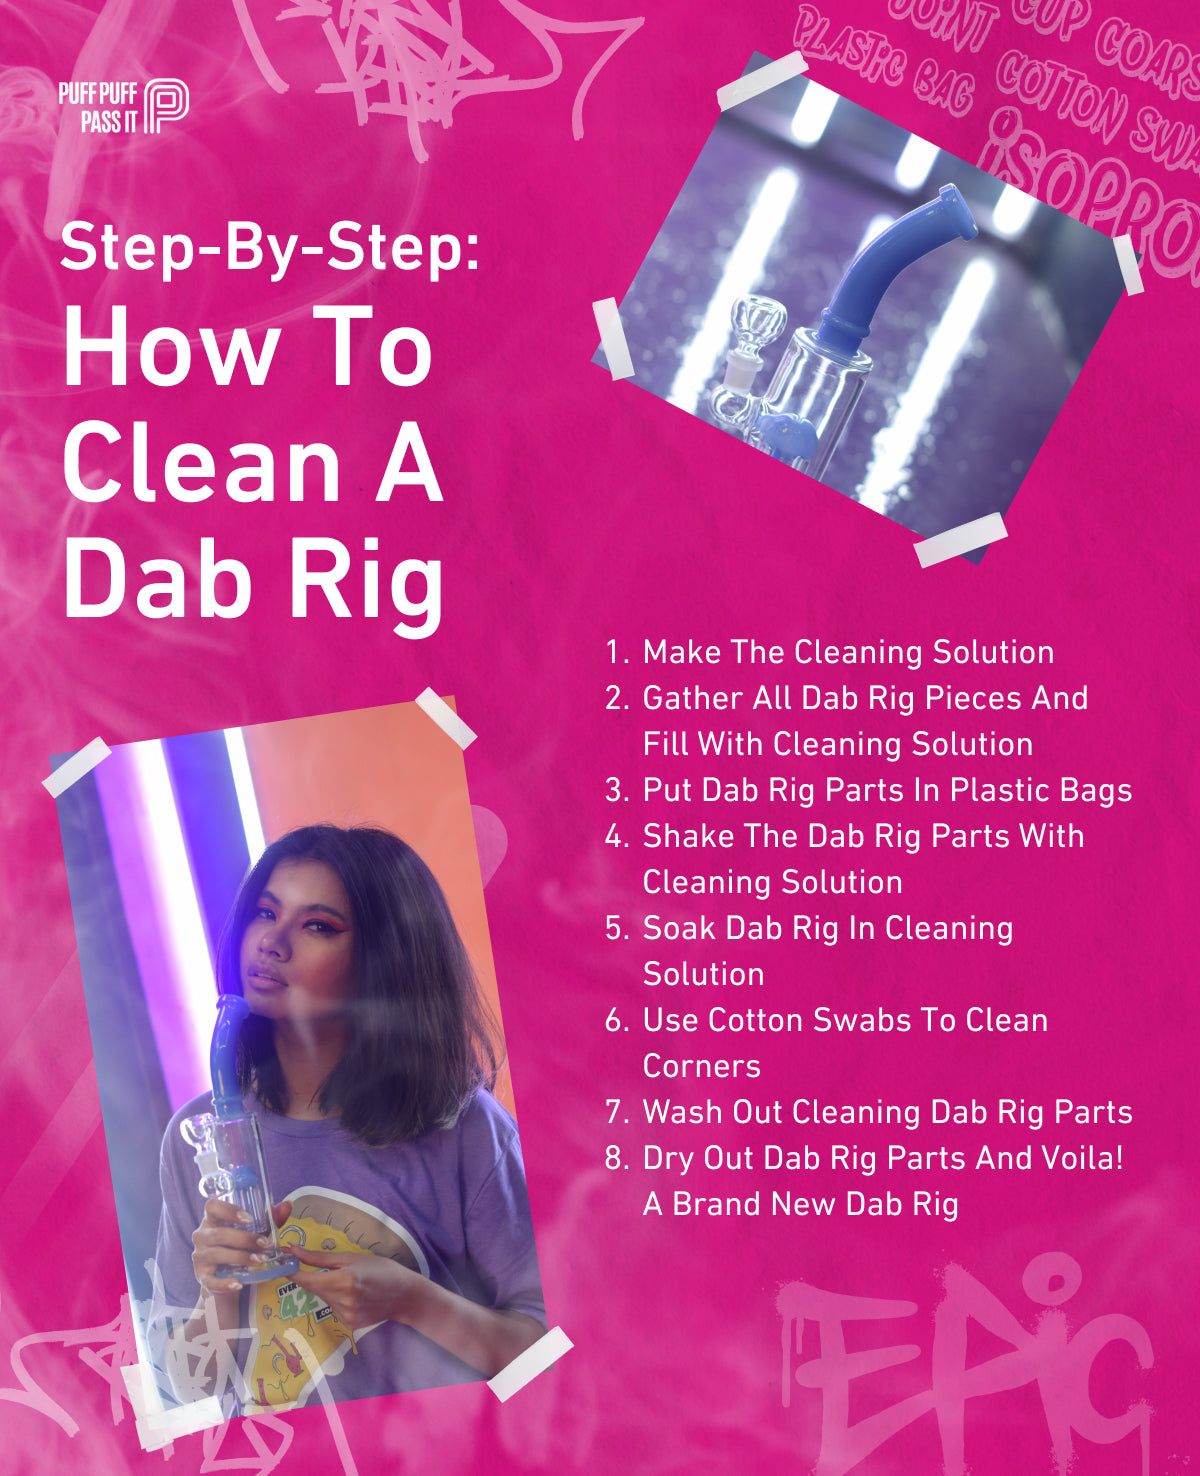 How to clean a dab rig (step-by-step guide)